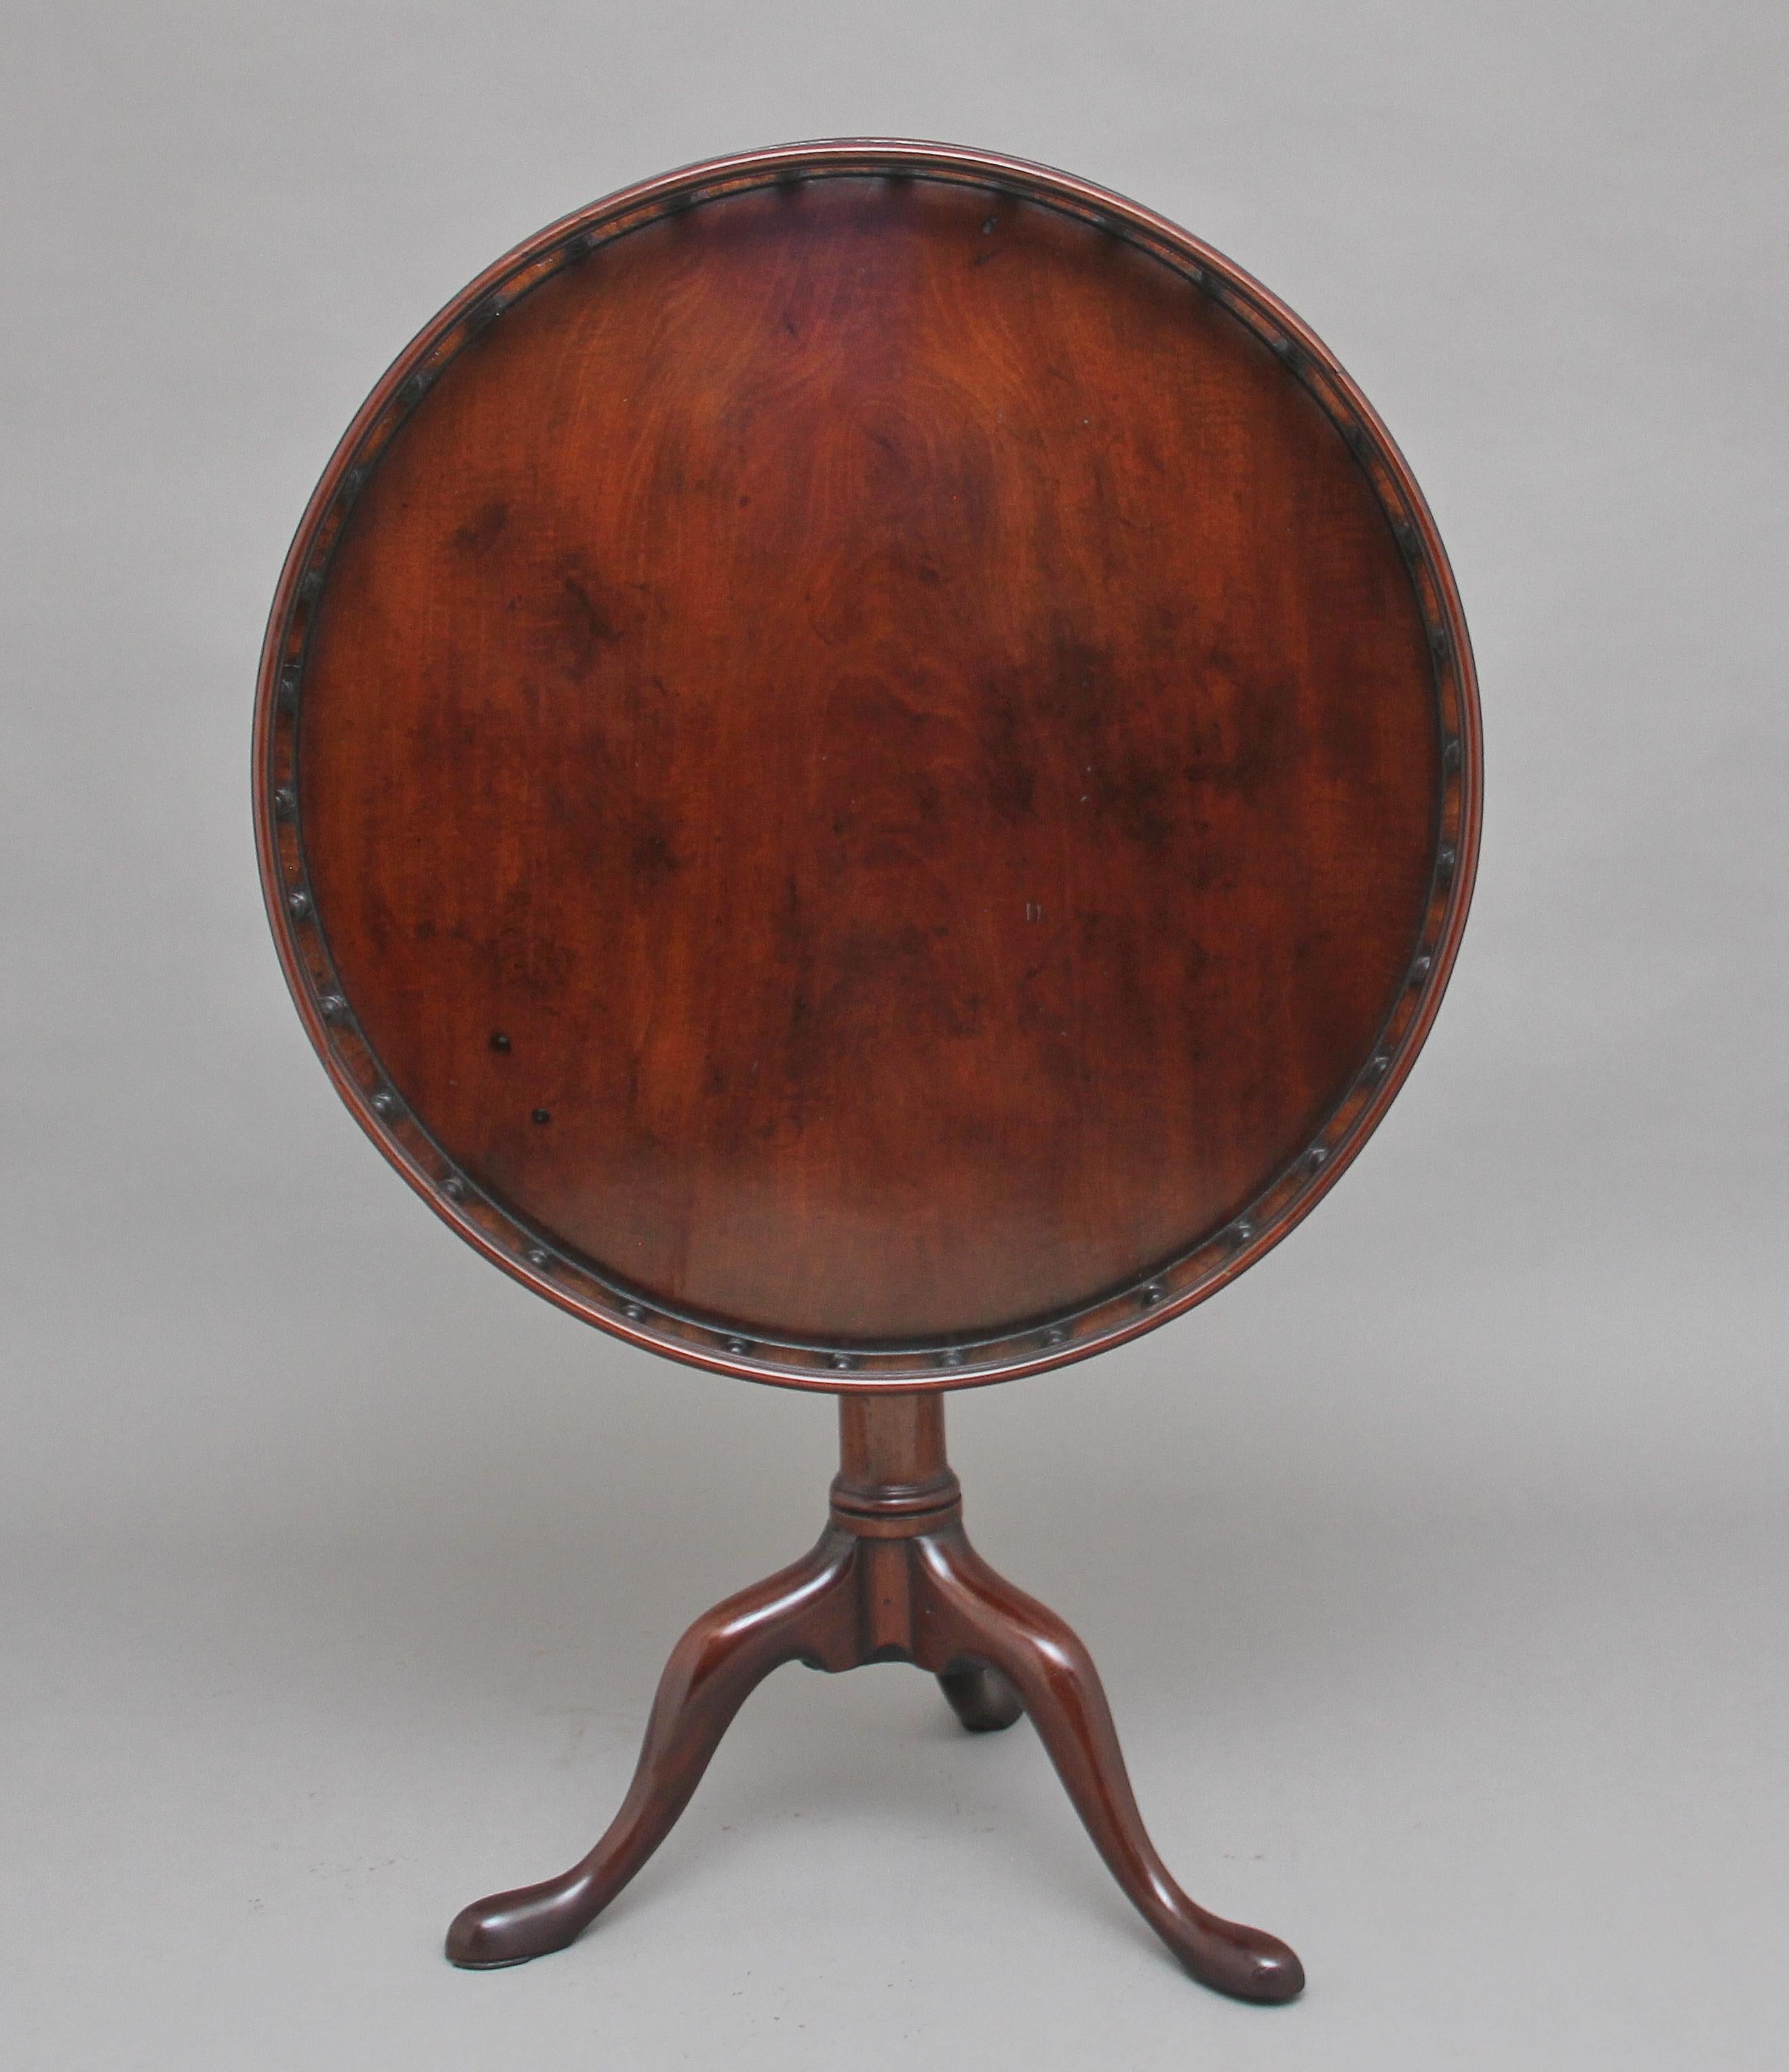 18th century mahogany tripod table having a wonderfully figured top decorated with a gallery around the edge, the gallery consisting of various turned spindles, supported on a turned column terminating with three slender shaped legs. In fantastic